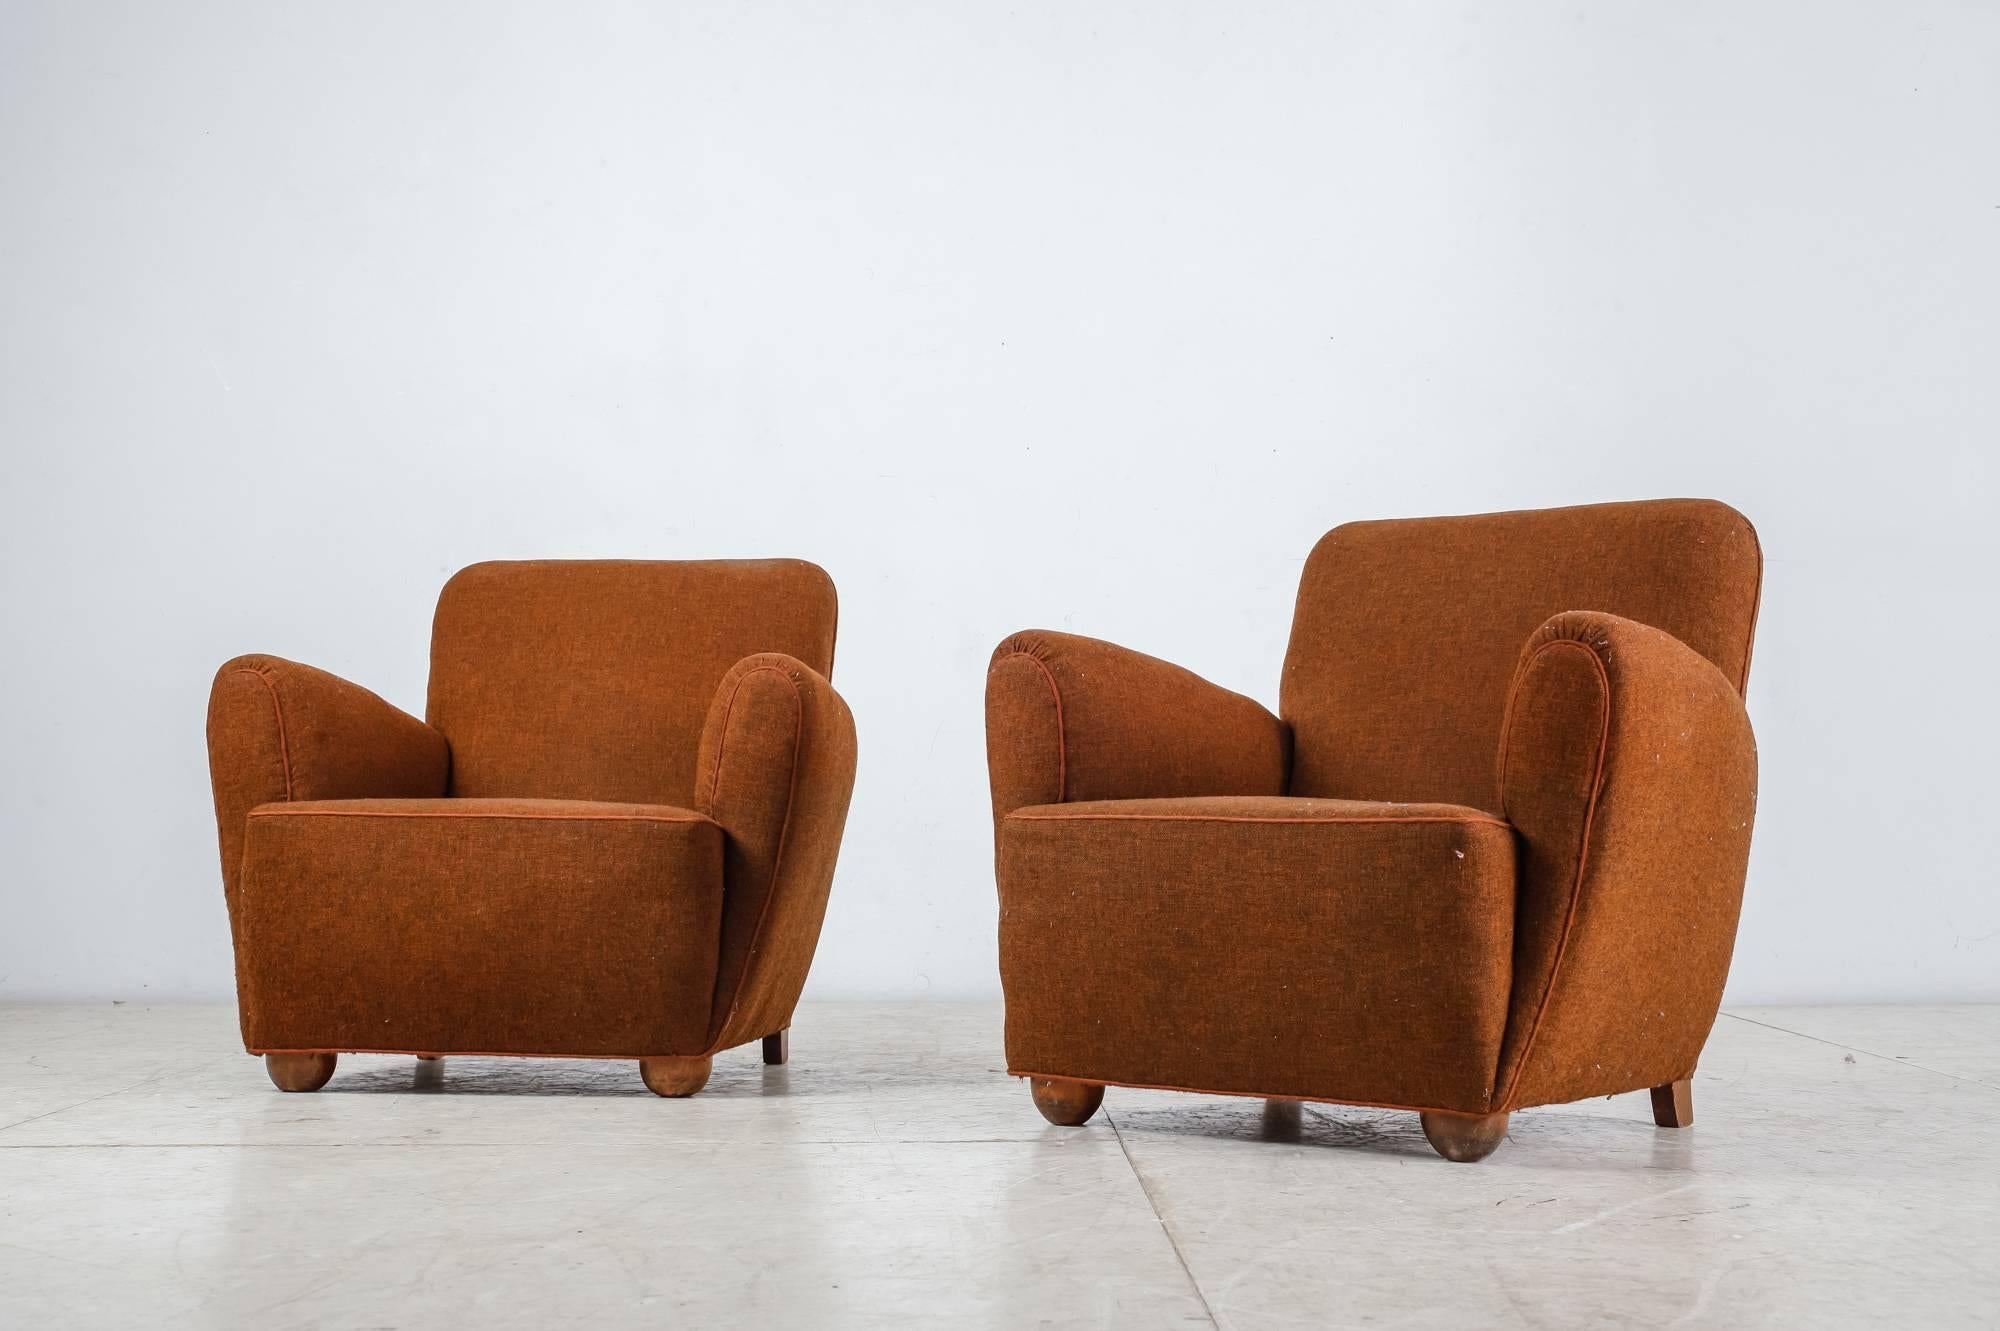 Scandinavian Modern Pair of Danish Lounge Chairs with Brown Upholstery, 1940s For Sale